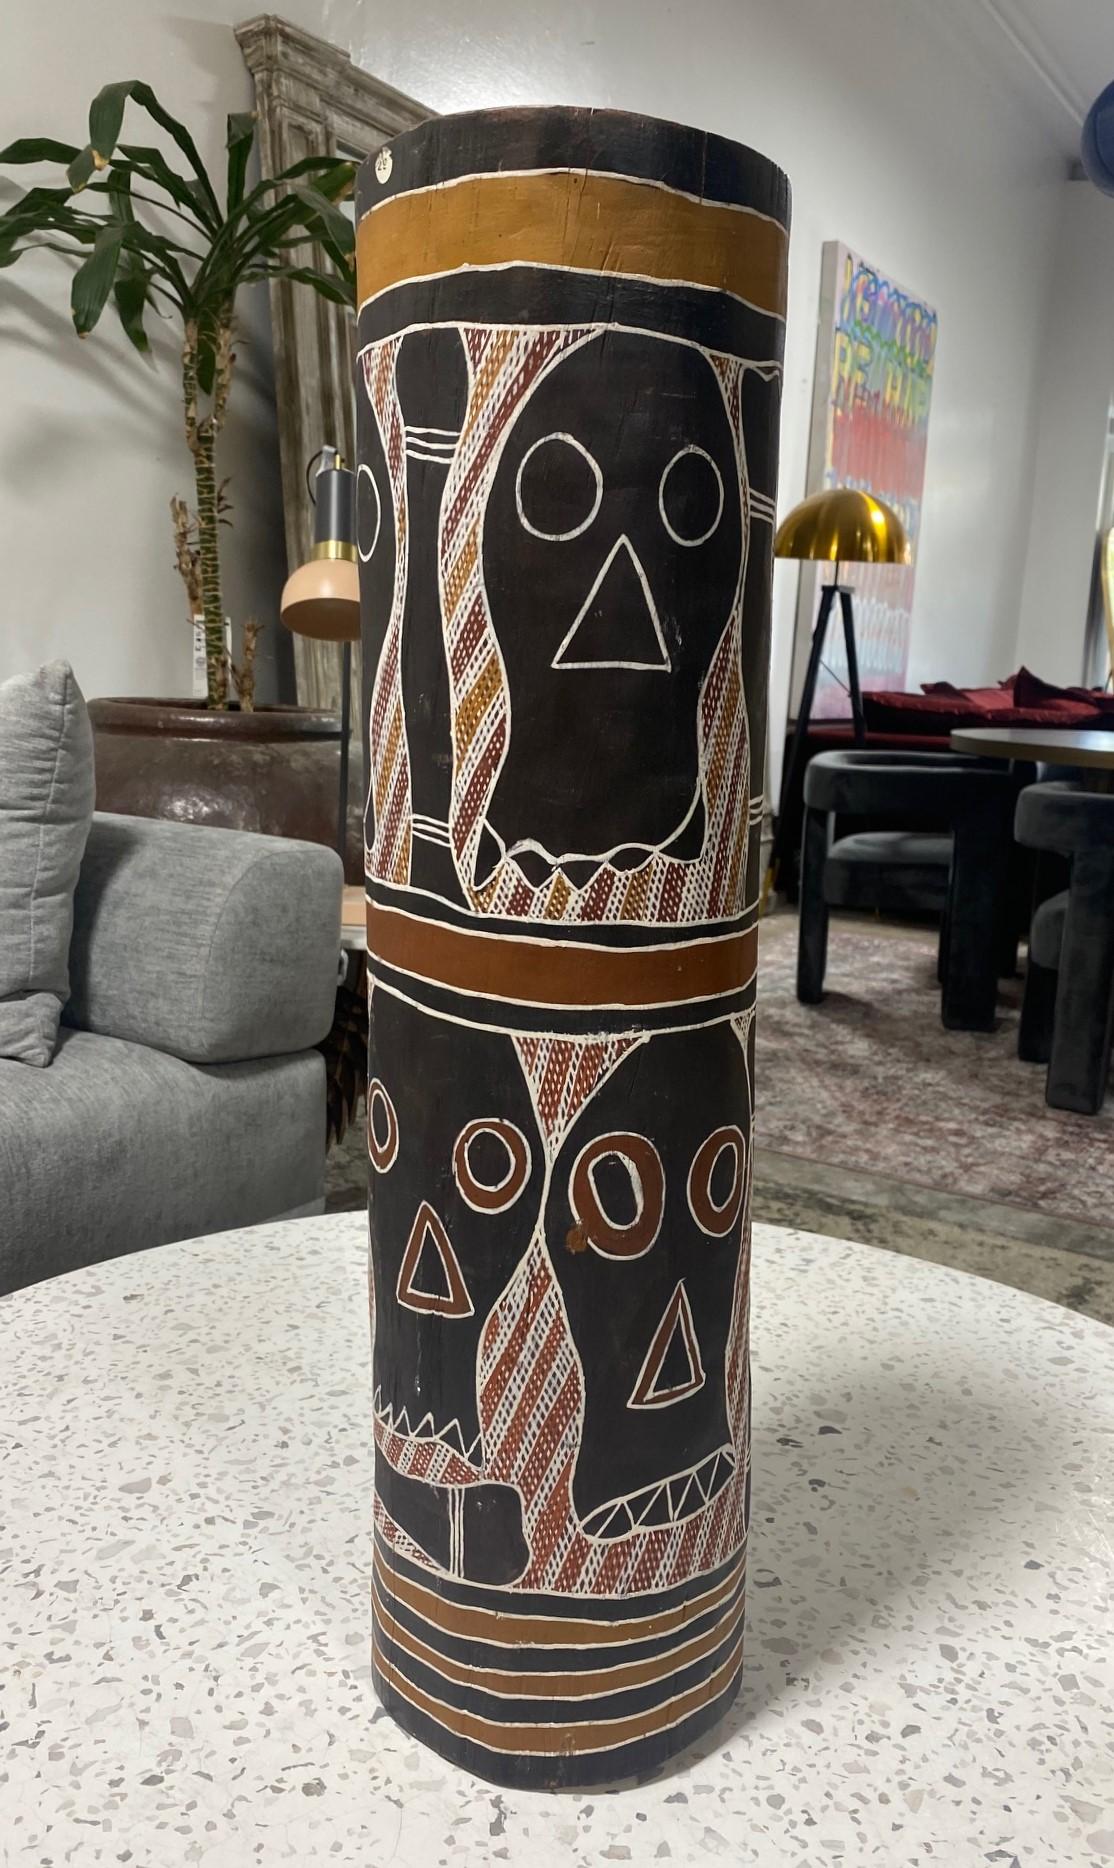 A wonderful and quite engaging hand carved wood with hand painted ochres on a hollow wooden log coffin with skull and bone designs. 

This piece is from the famed Kelton Collection of important Australian Indigenous Works of Art and is attributed